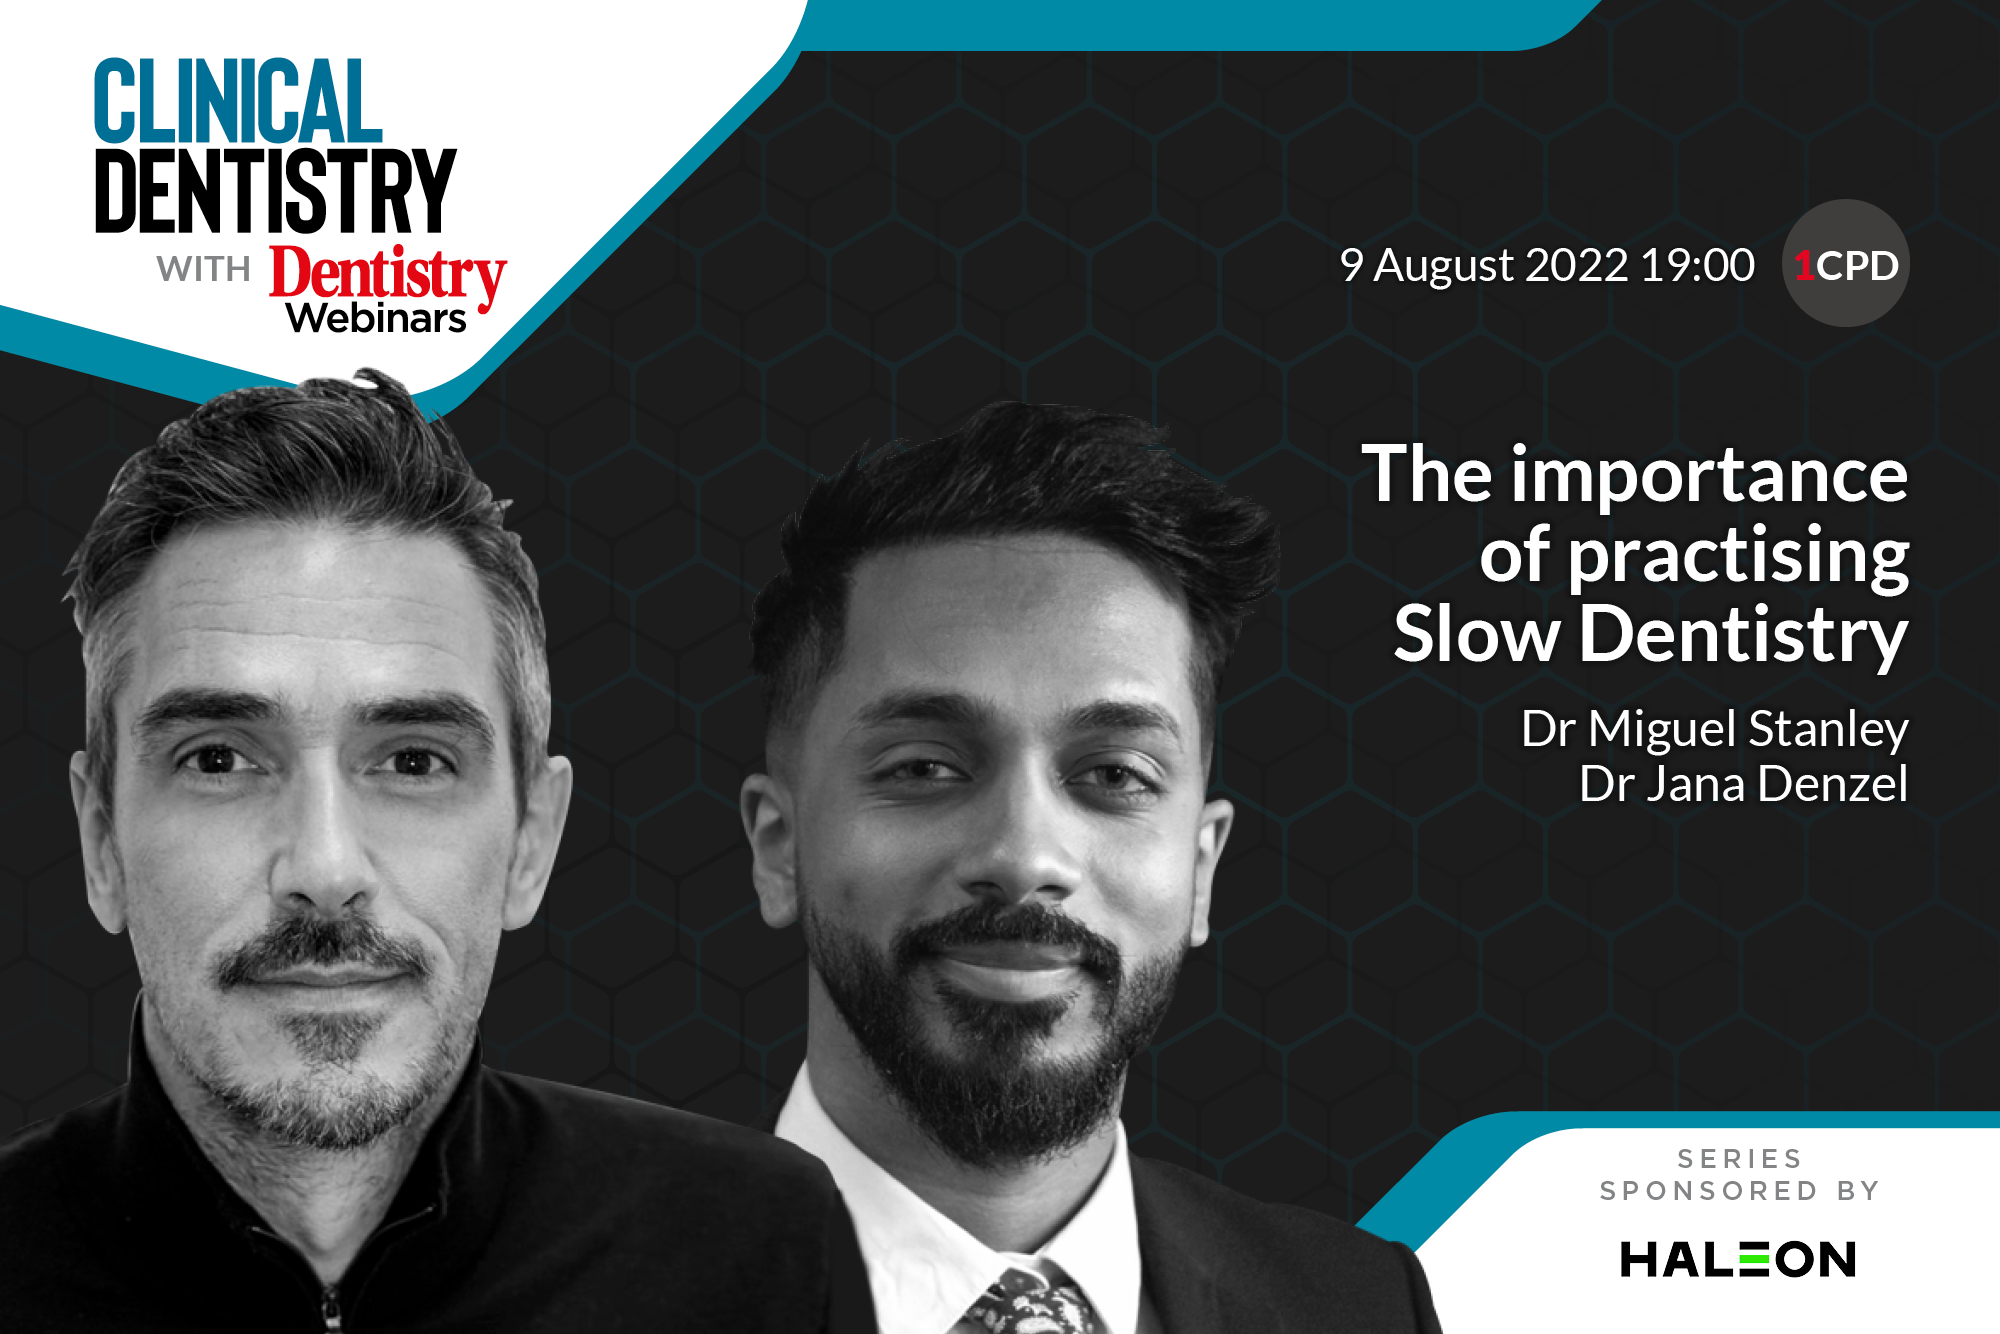 Join Miguel Stanley and Jana Denzel as they discuss the importance of Slow Dentistry on 9 August at 7pm.